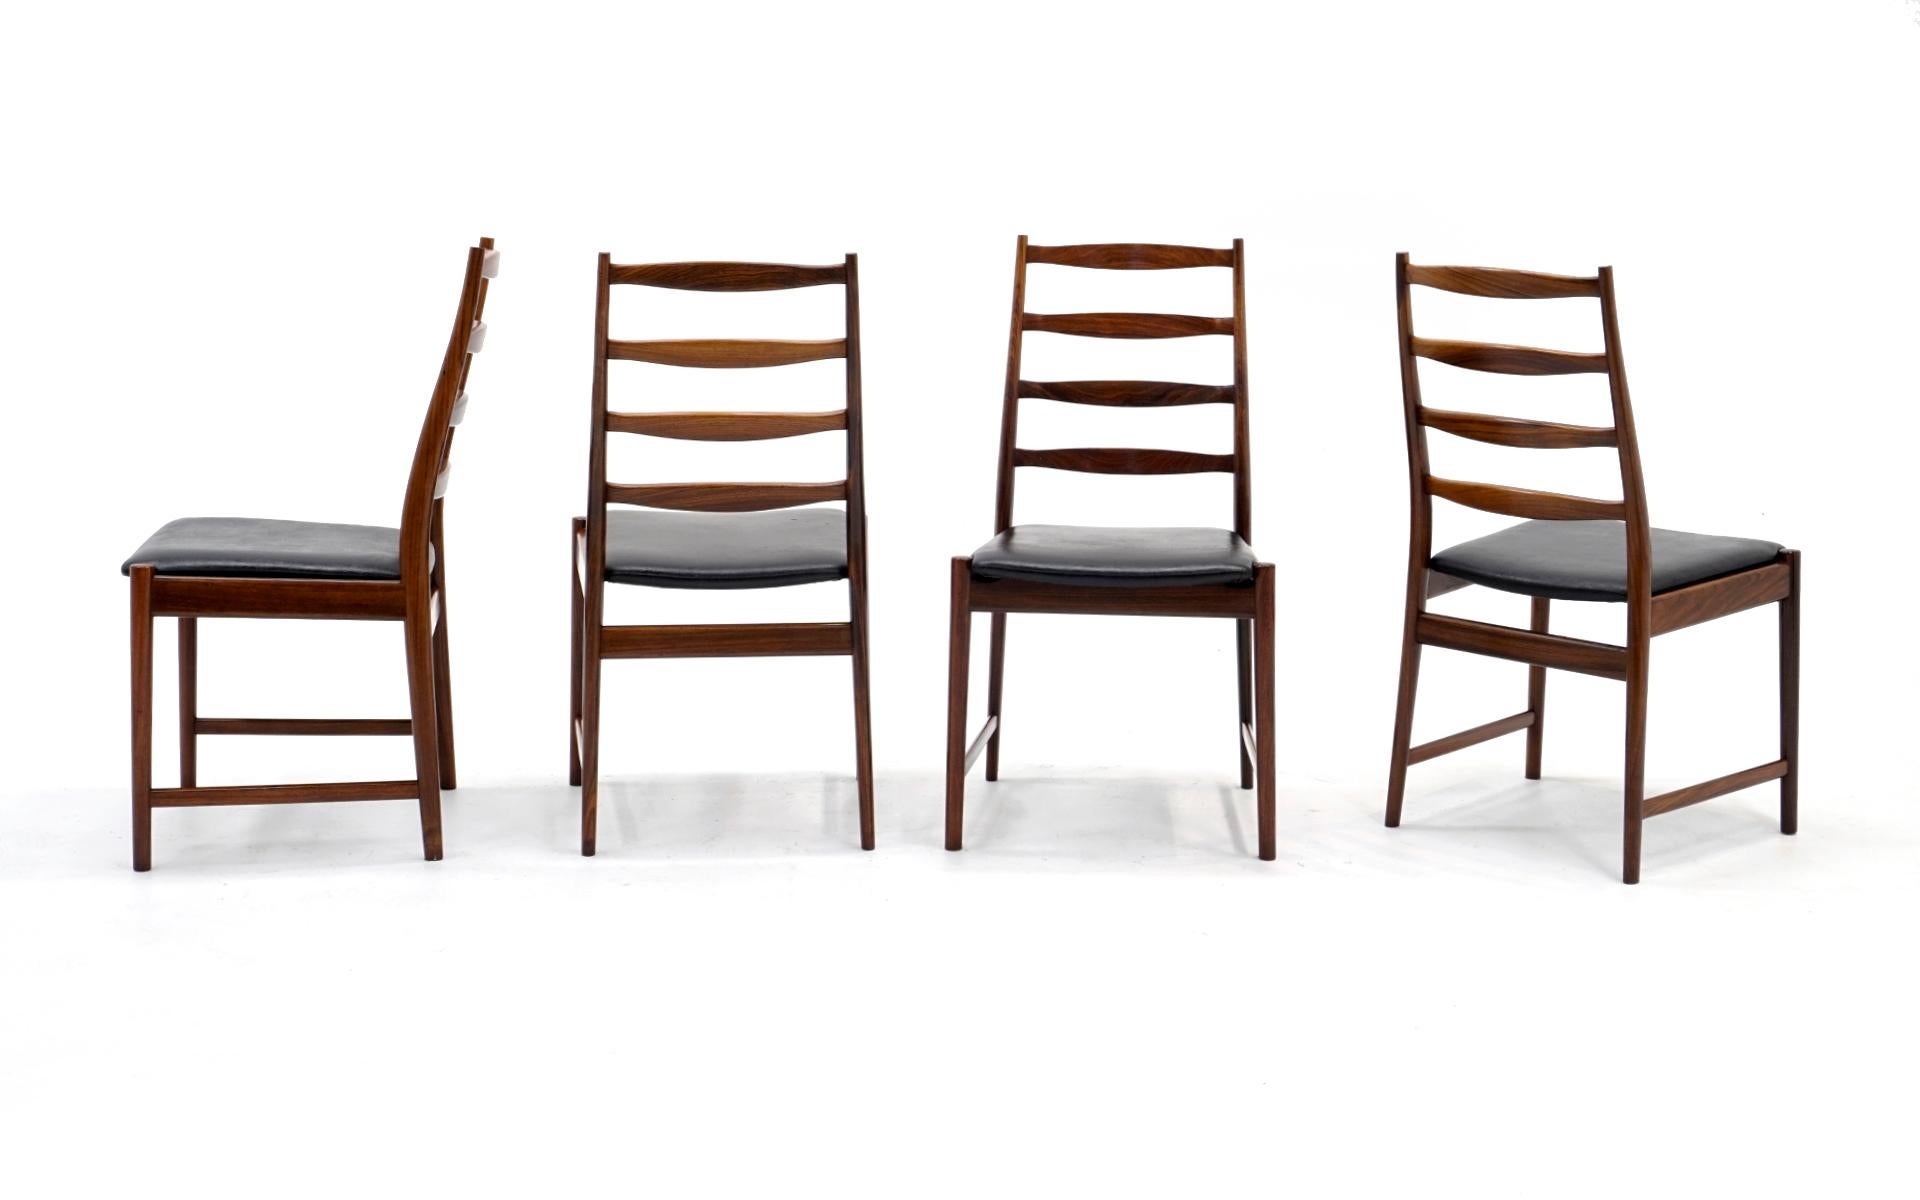 Beautiful set of 10 solid rosewood dining chairs designed by Torbjørn Afdal, Norway, 1960s. These are in amazing original condition. Very few signs of wear. Very solid and sturdy chairs in which a person can sit for long periods. Simply one of the